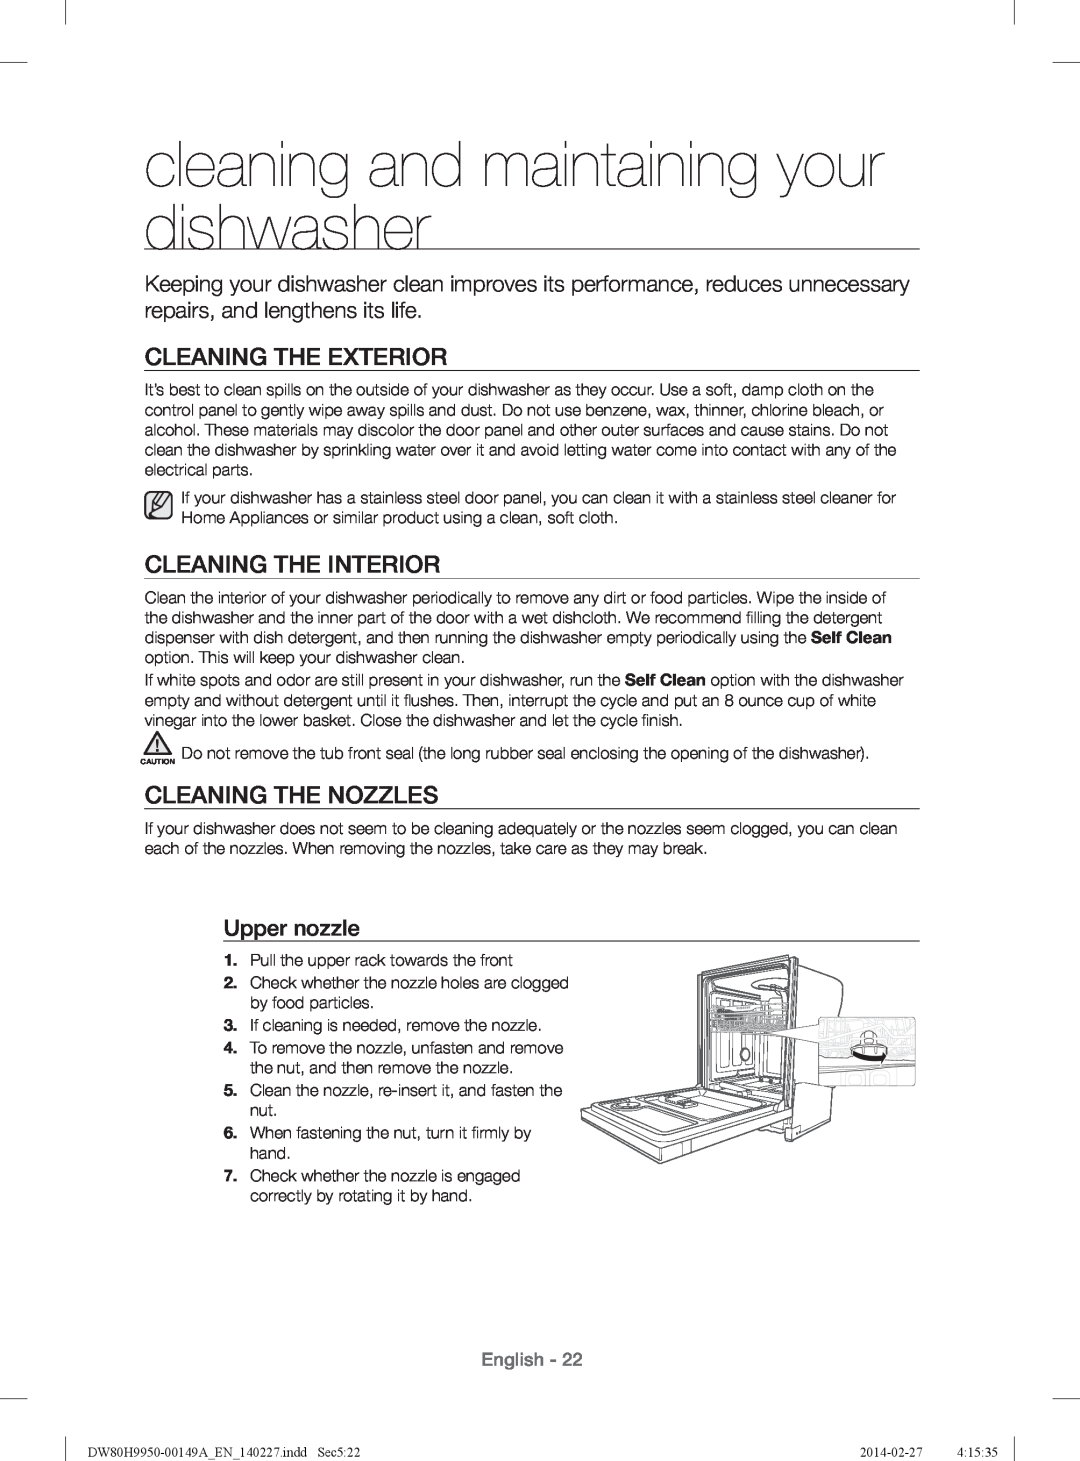 Samsung DW80H9930US cleaning and maintaining your dishwasher, Cleaning The Exterior, Cleaning The Interior, Upper nozzle 